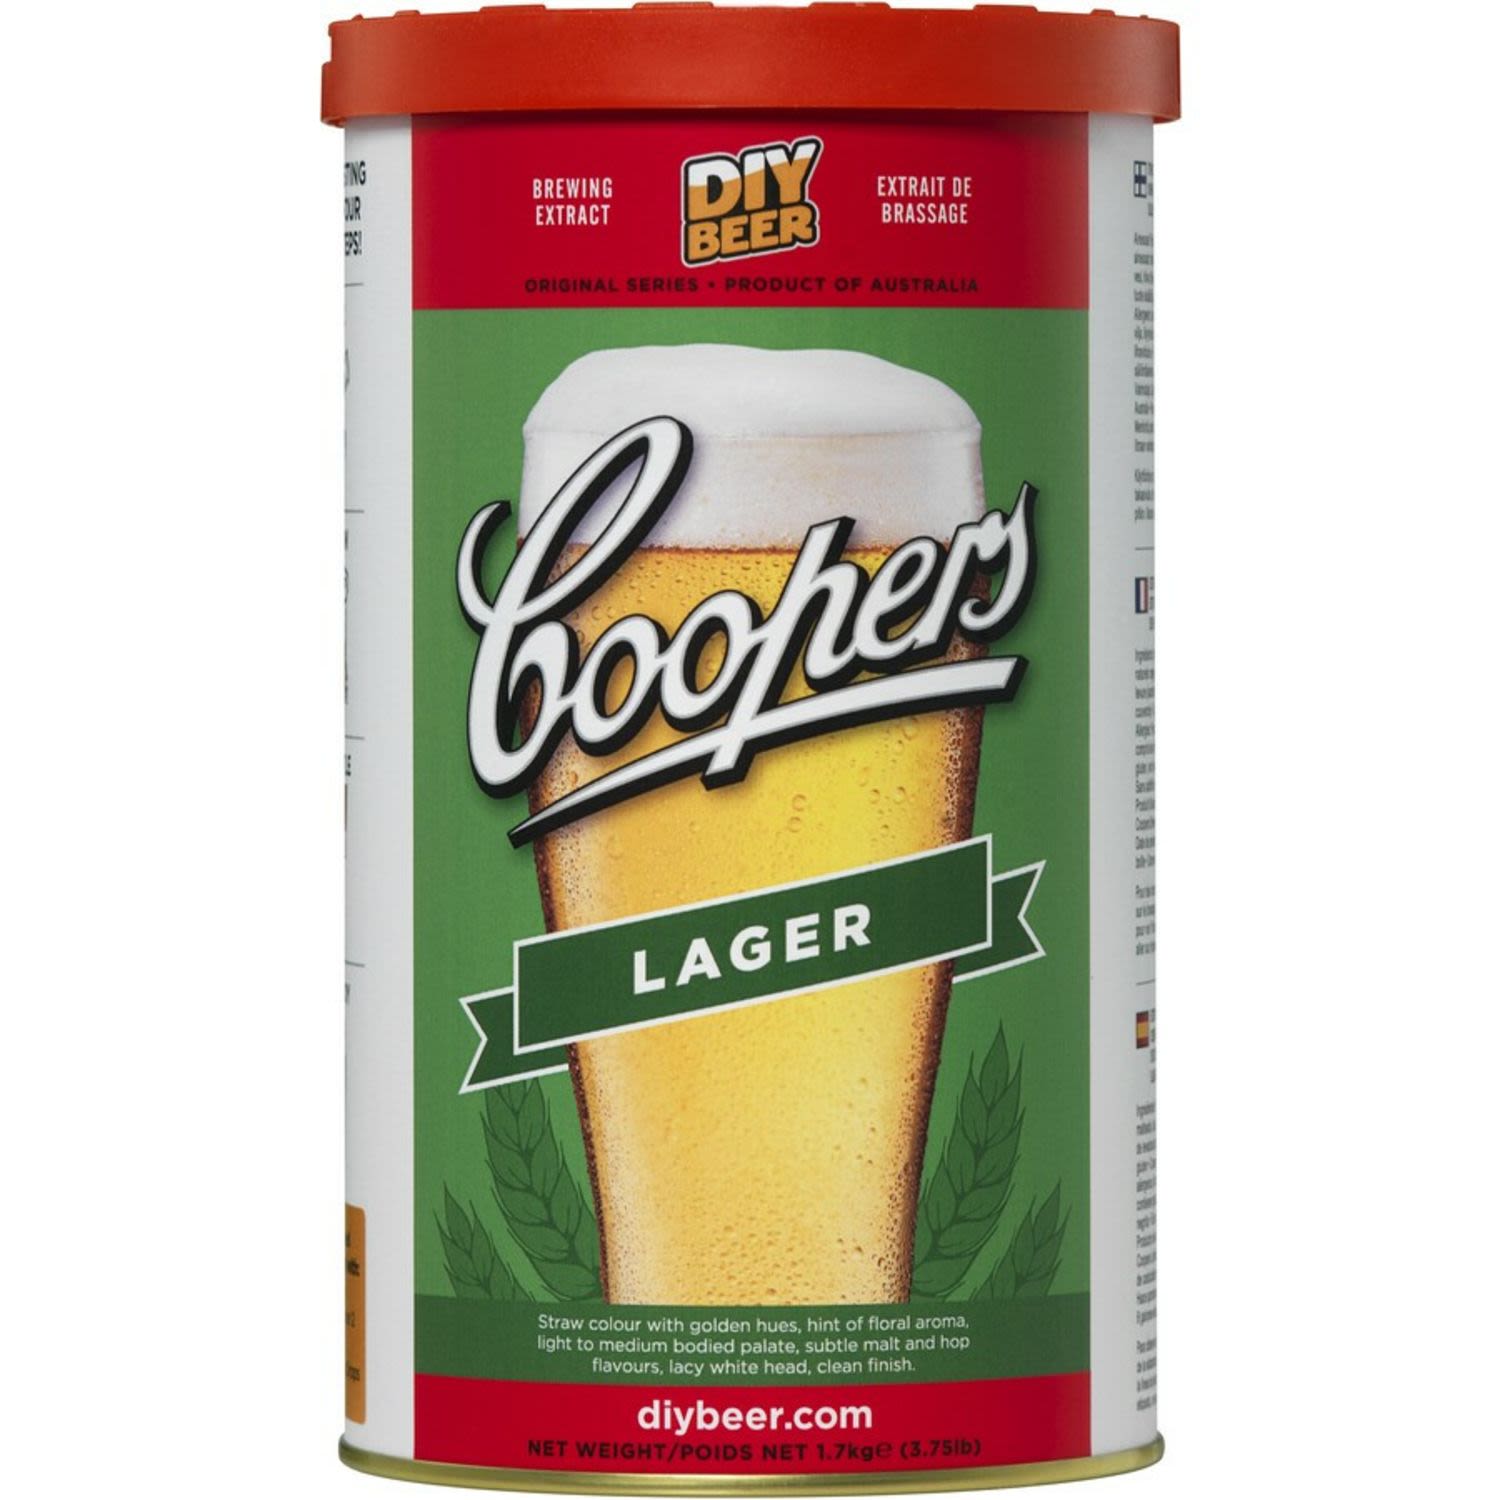 Coopers Home Brew Lager, 1.7 Kilogram